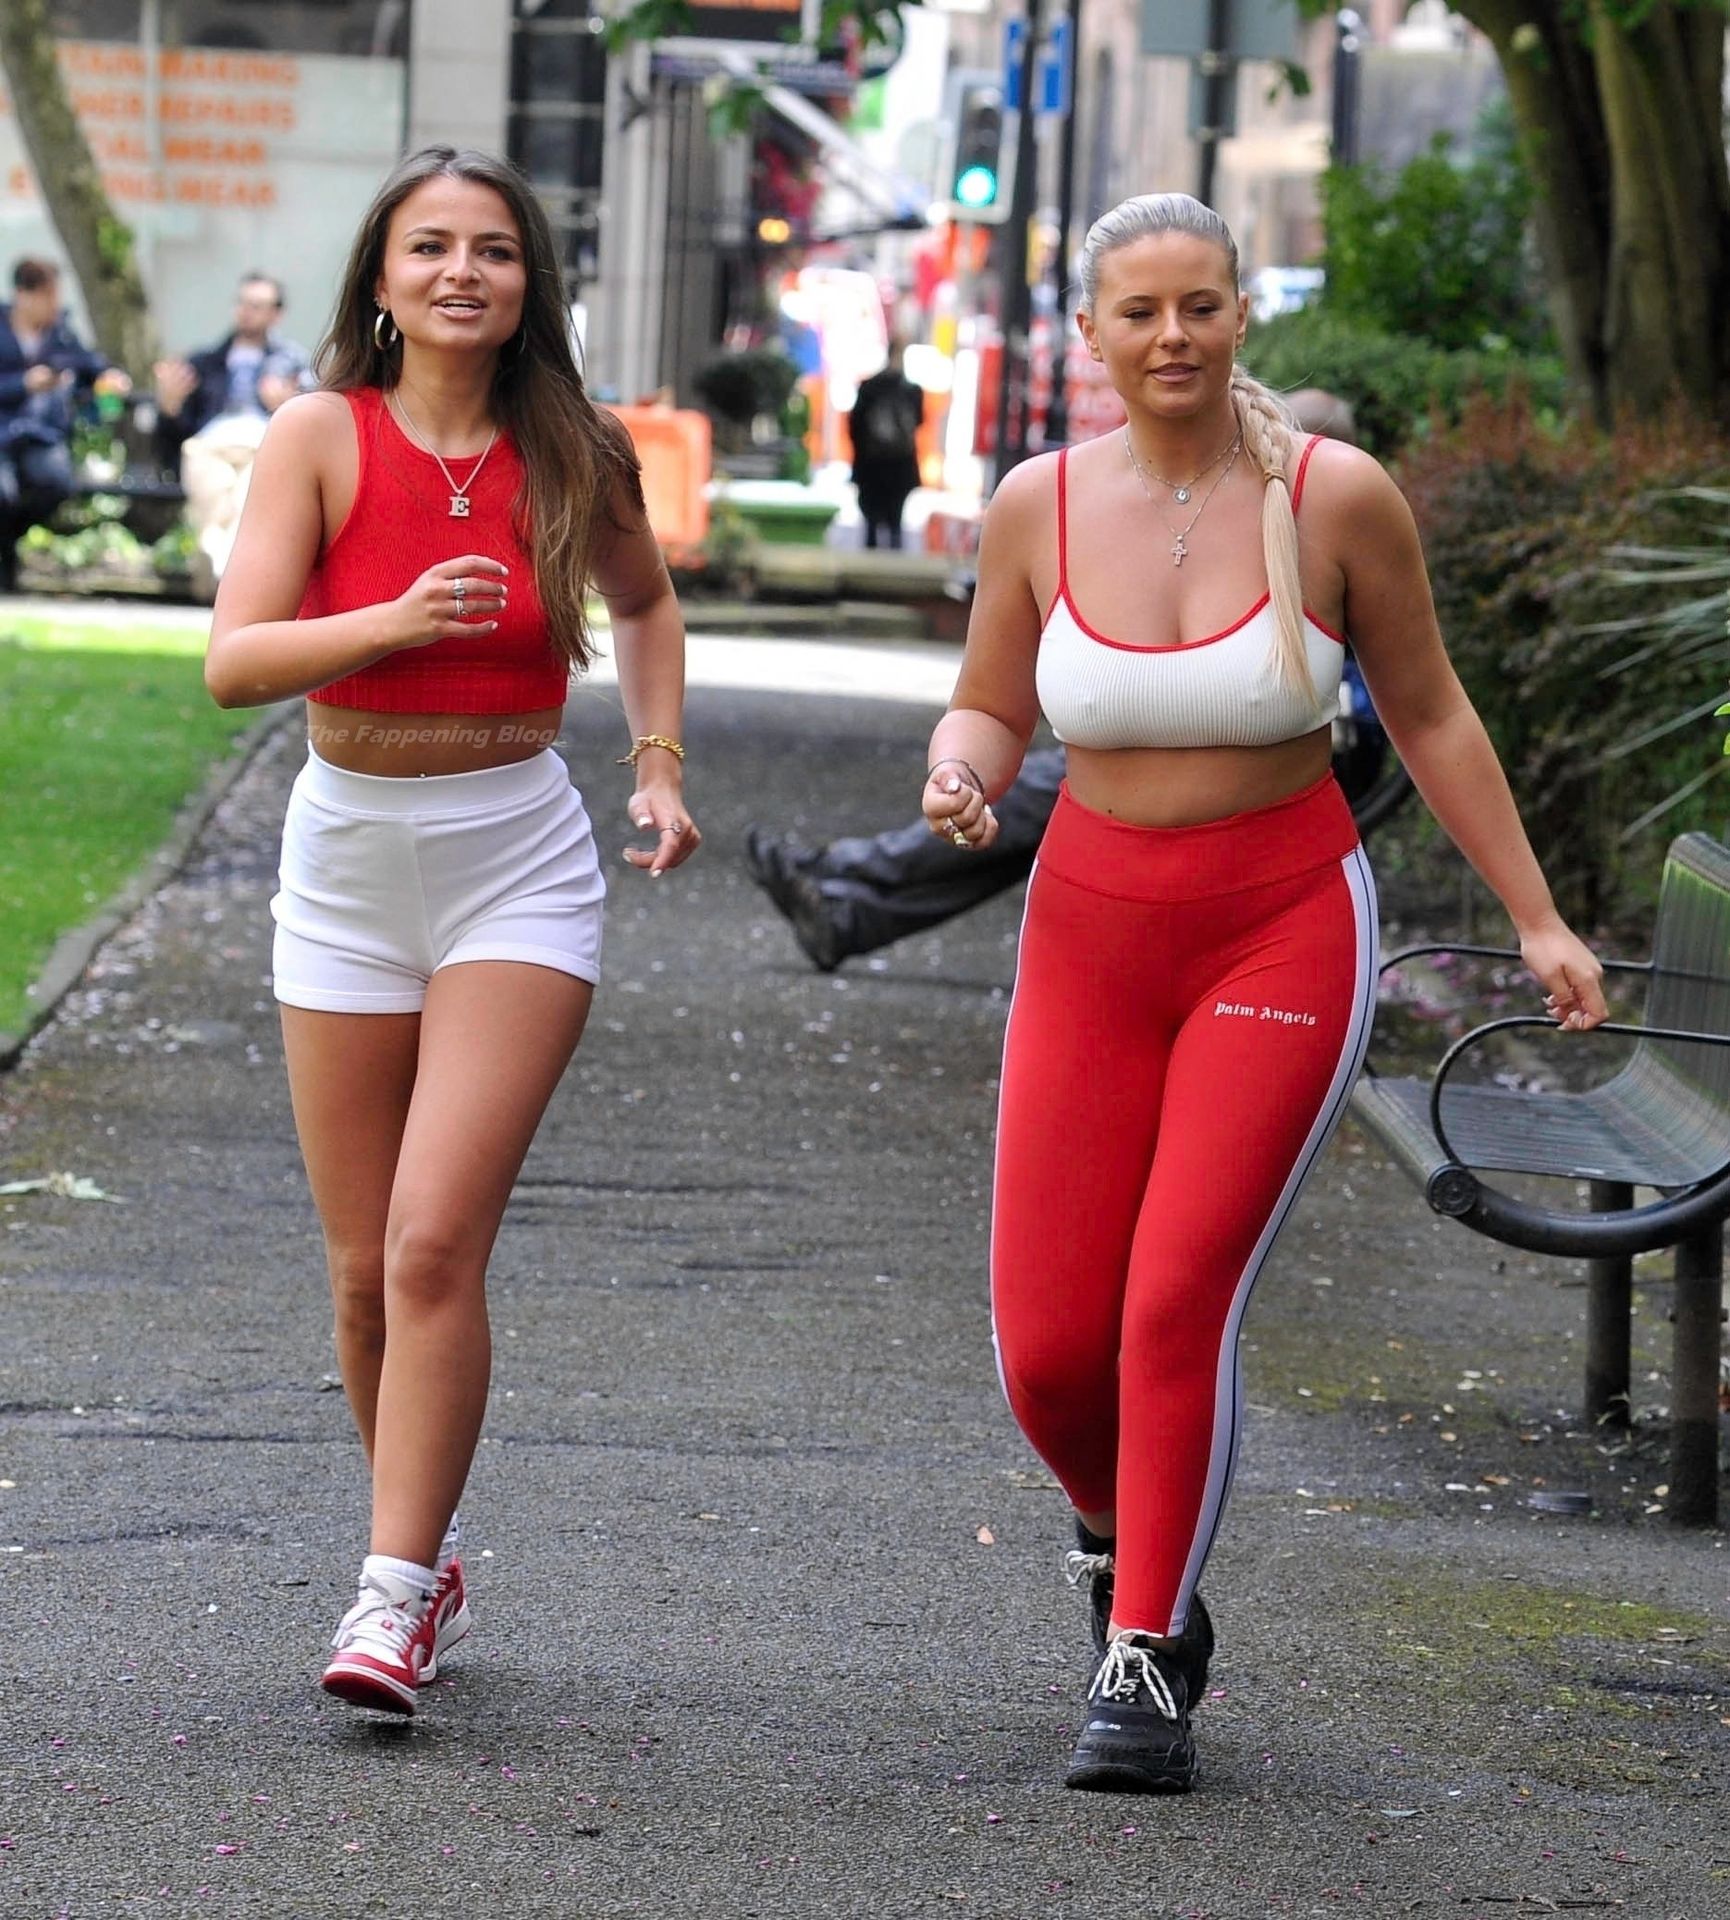 Apollonia Llewellyn is Pictured Working Out in Manchester (21 Photos)